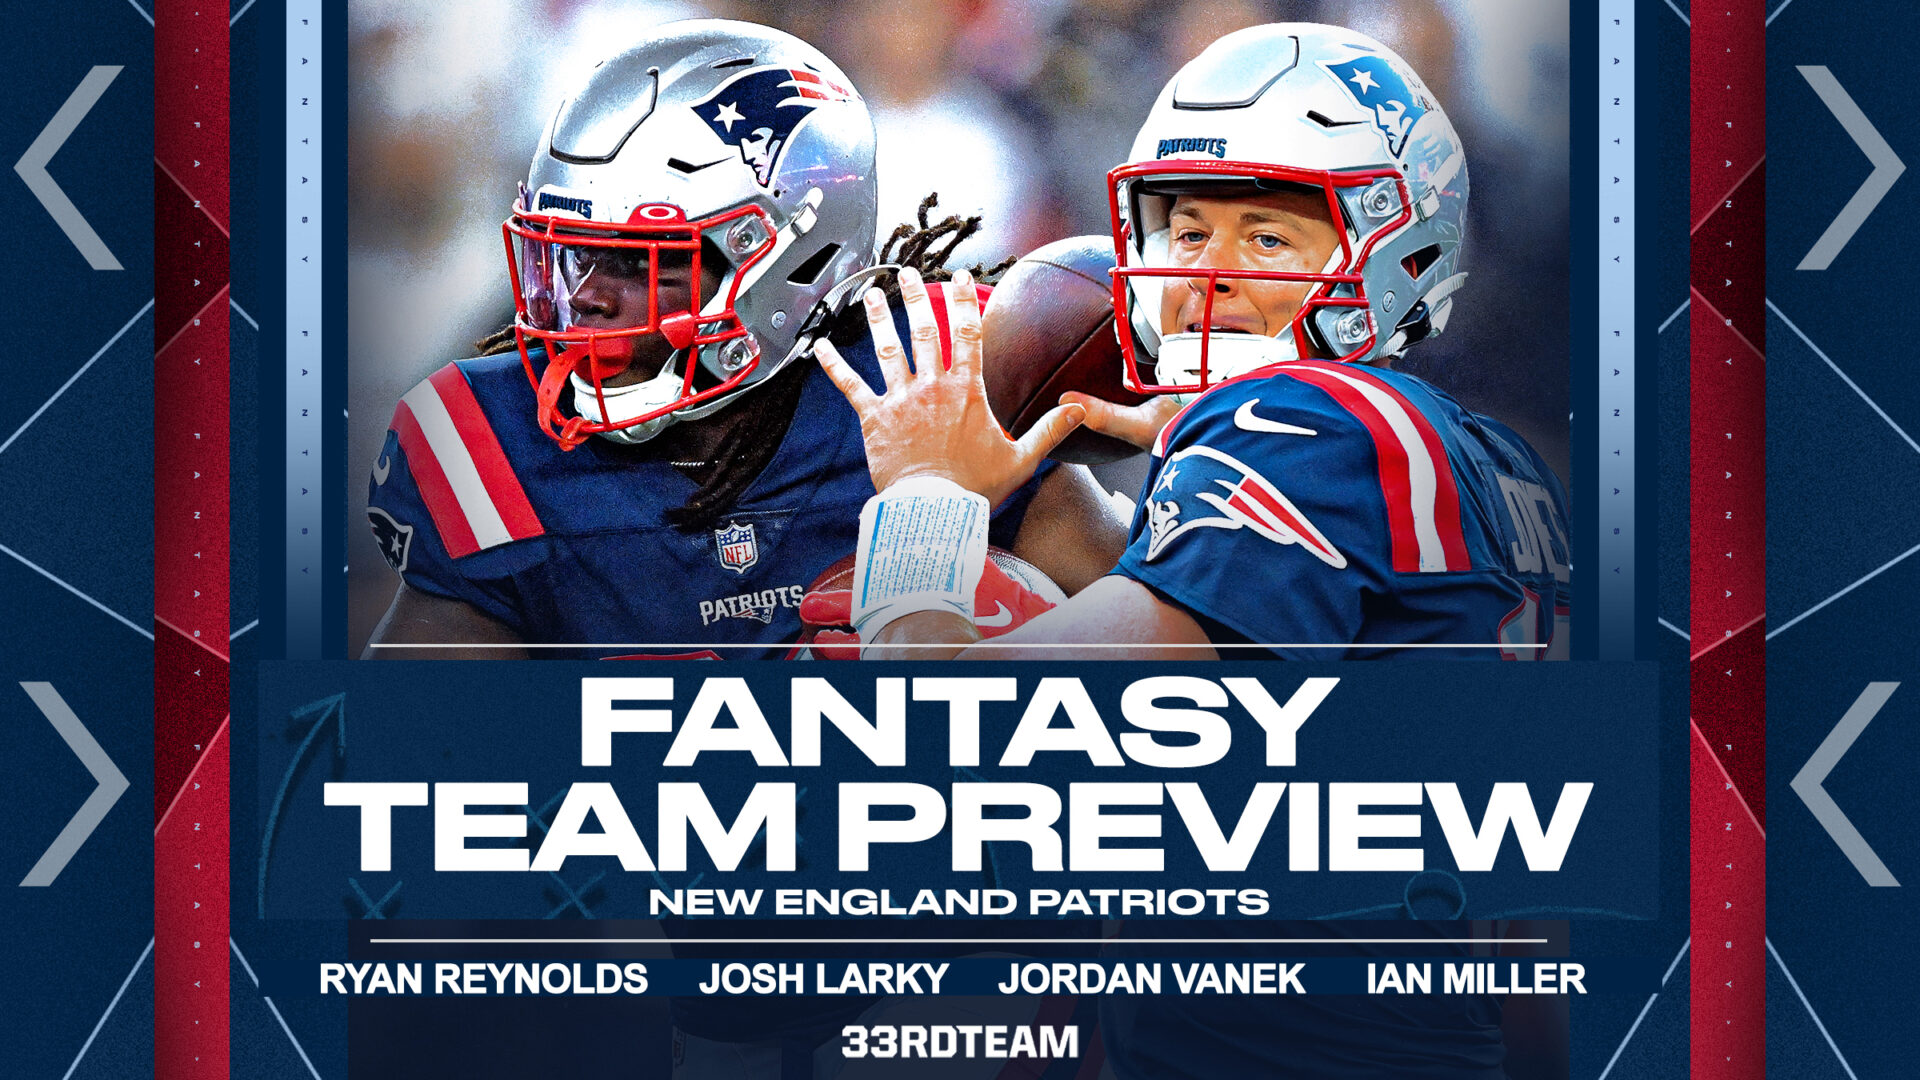 Blue and red graphic featuring close-up shots of Mac Jones and Rhamondre Stevenson in front of text that reads "Fantasy Team Preview, New England Patriots"